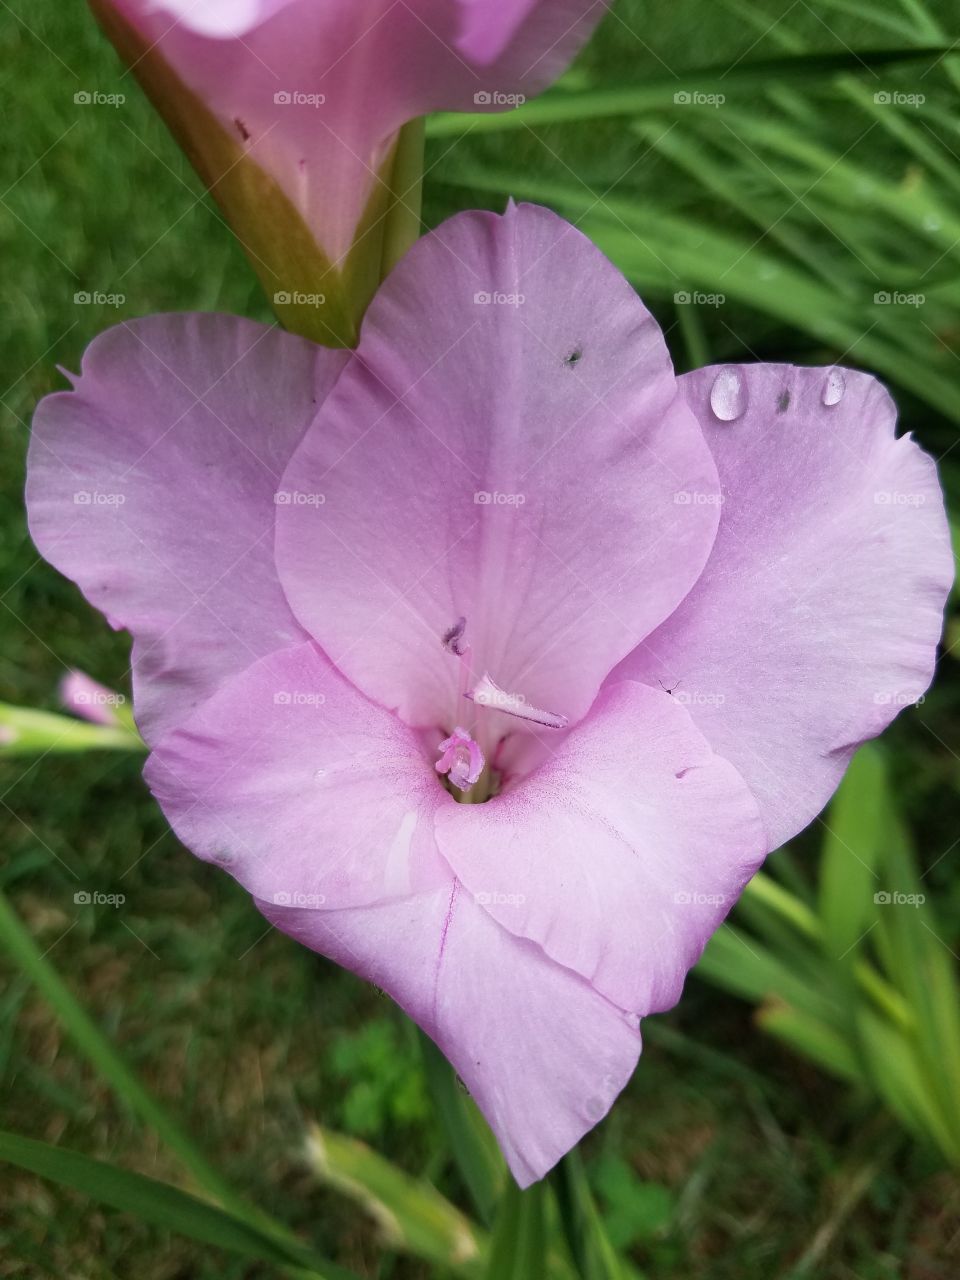 Pink flowers after rain